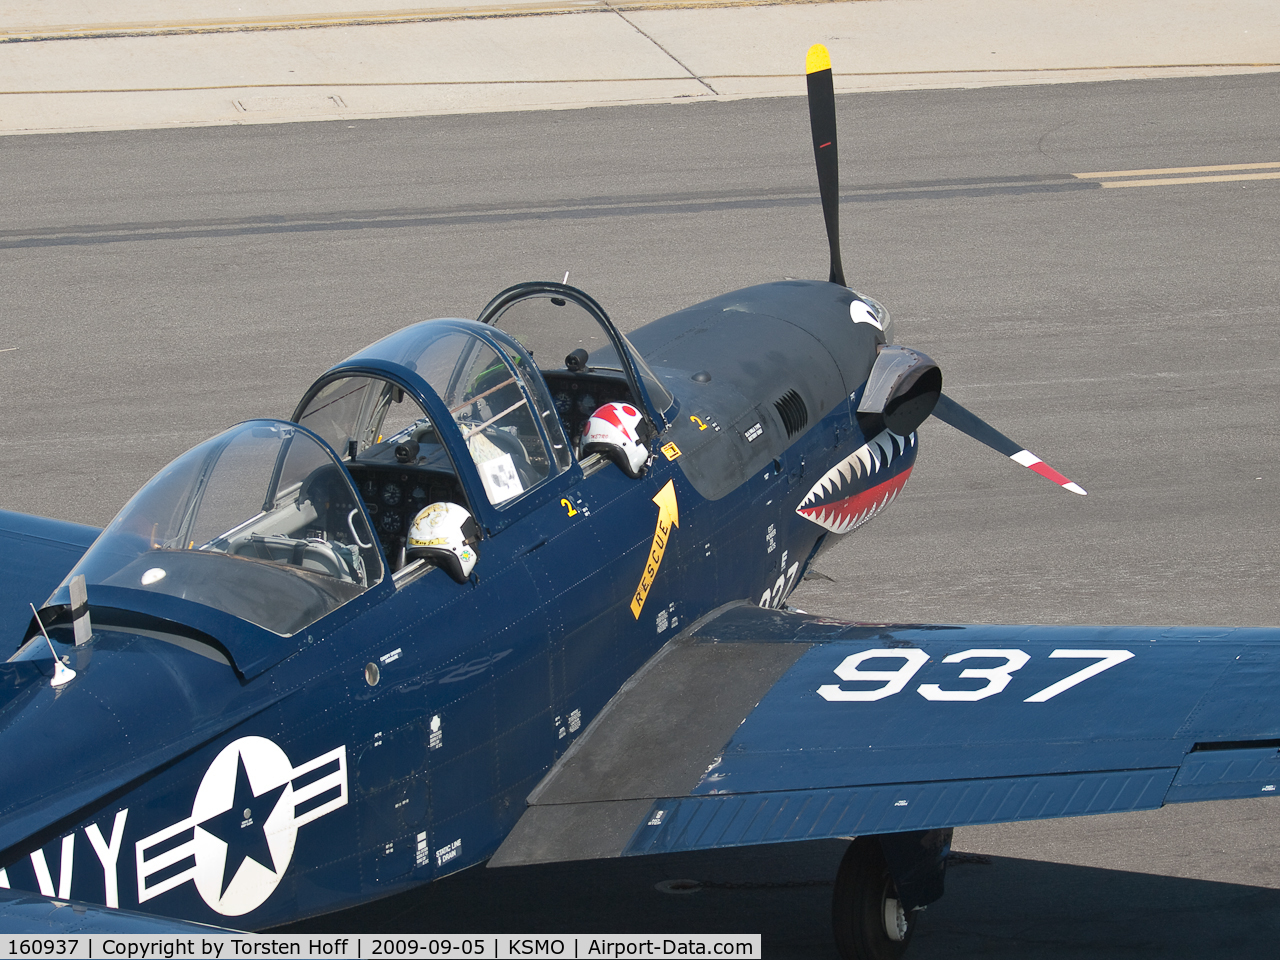 160937, Beech T-34C Turbo Mentor C/N GL-123, 160937 parked at KSMO